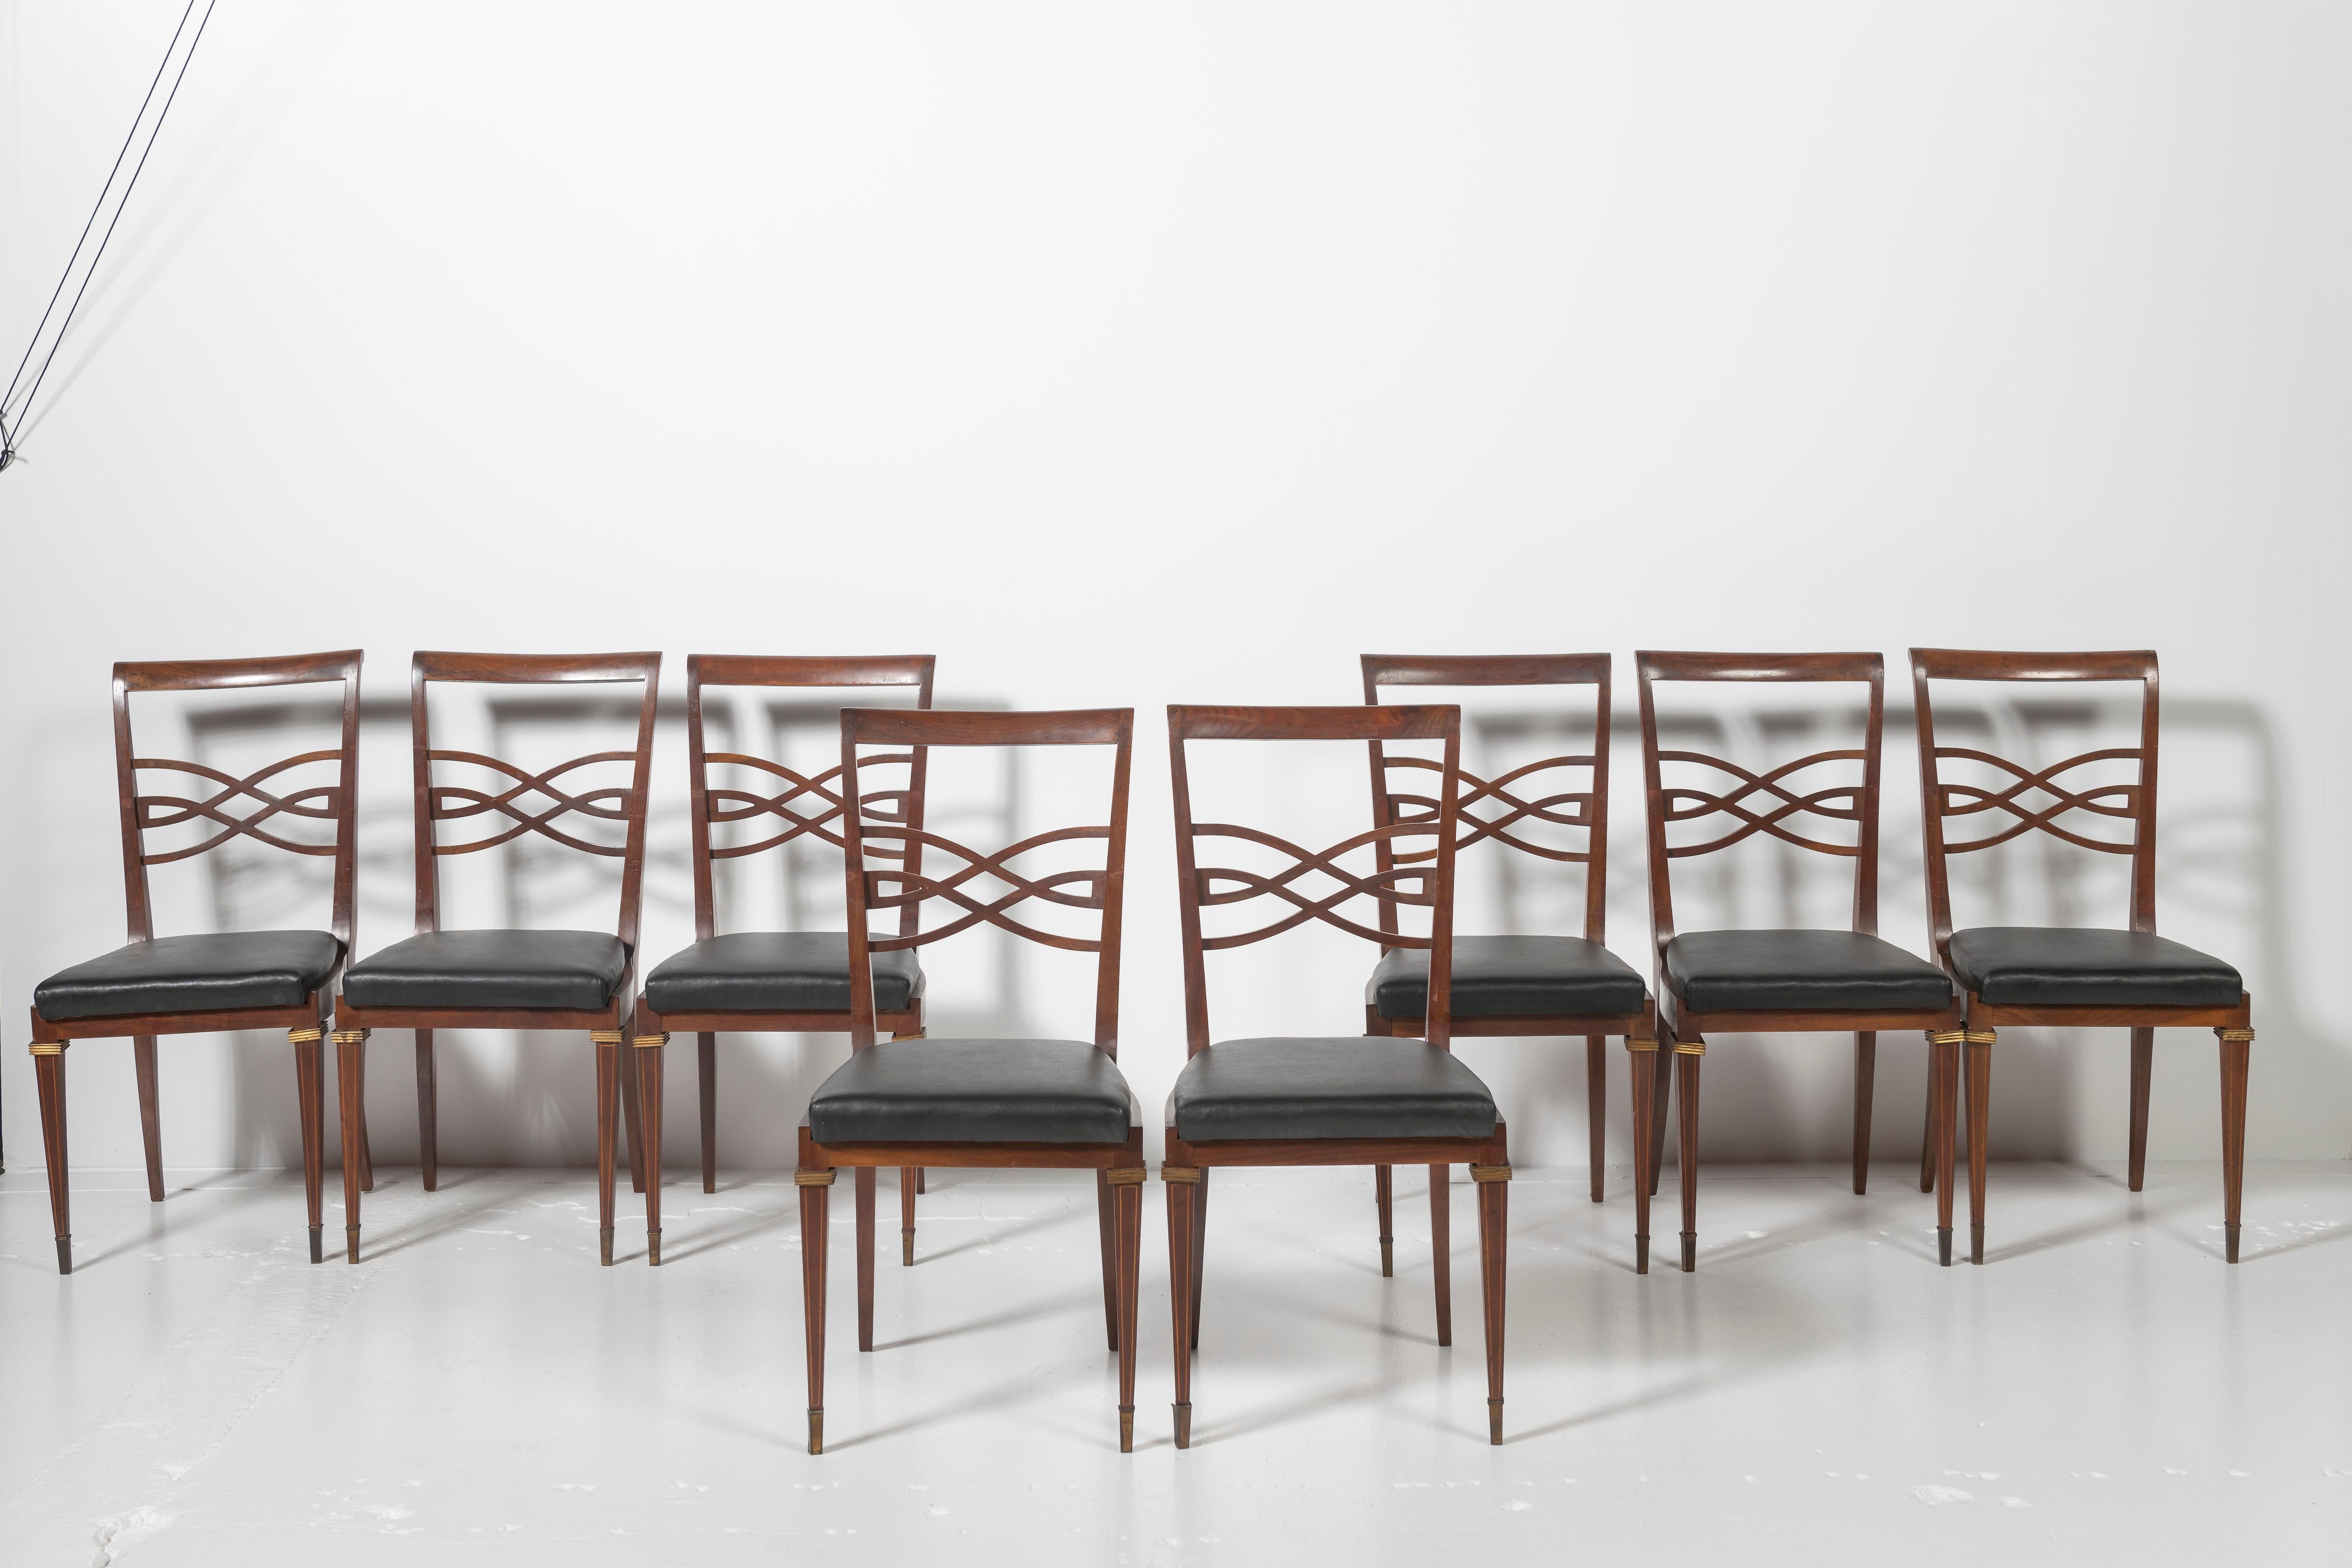 Attributed to Otto Sedie, these 8 Italian dining chairs are in rosewood with fretwork, brass details, and vinyl upholstery. Very graceful, mid century style, these chairs are a welcome addition to a room.